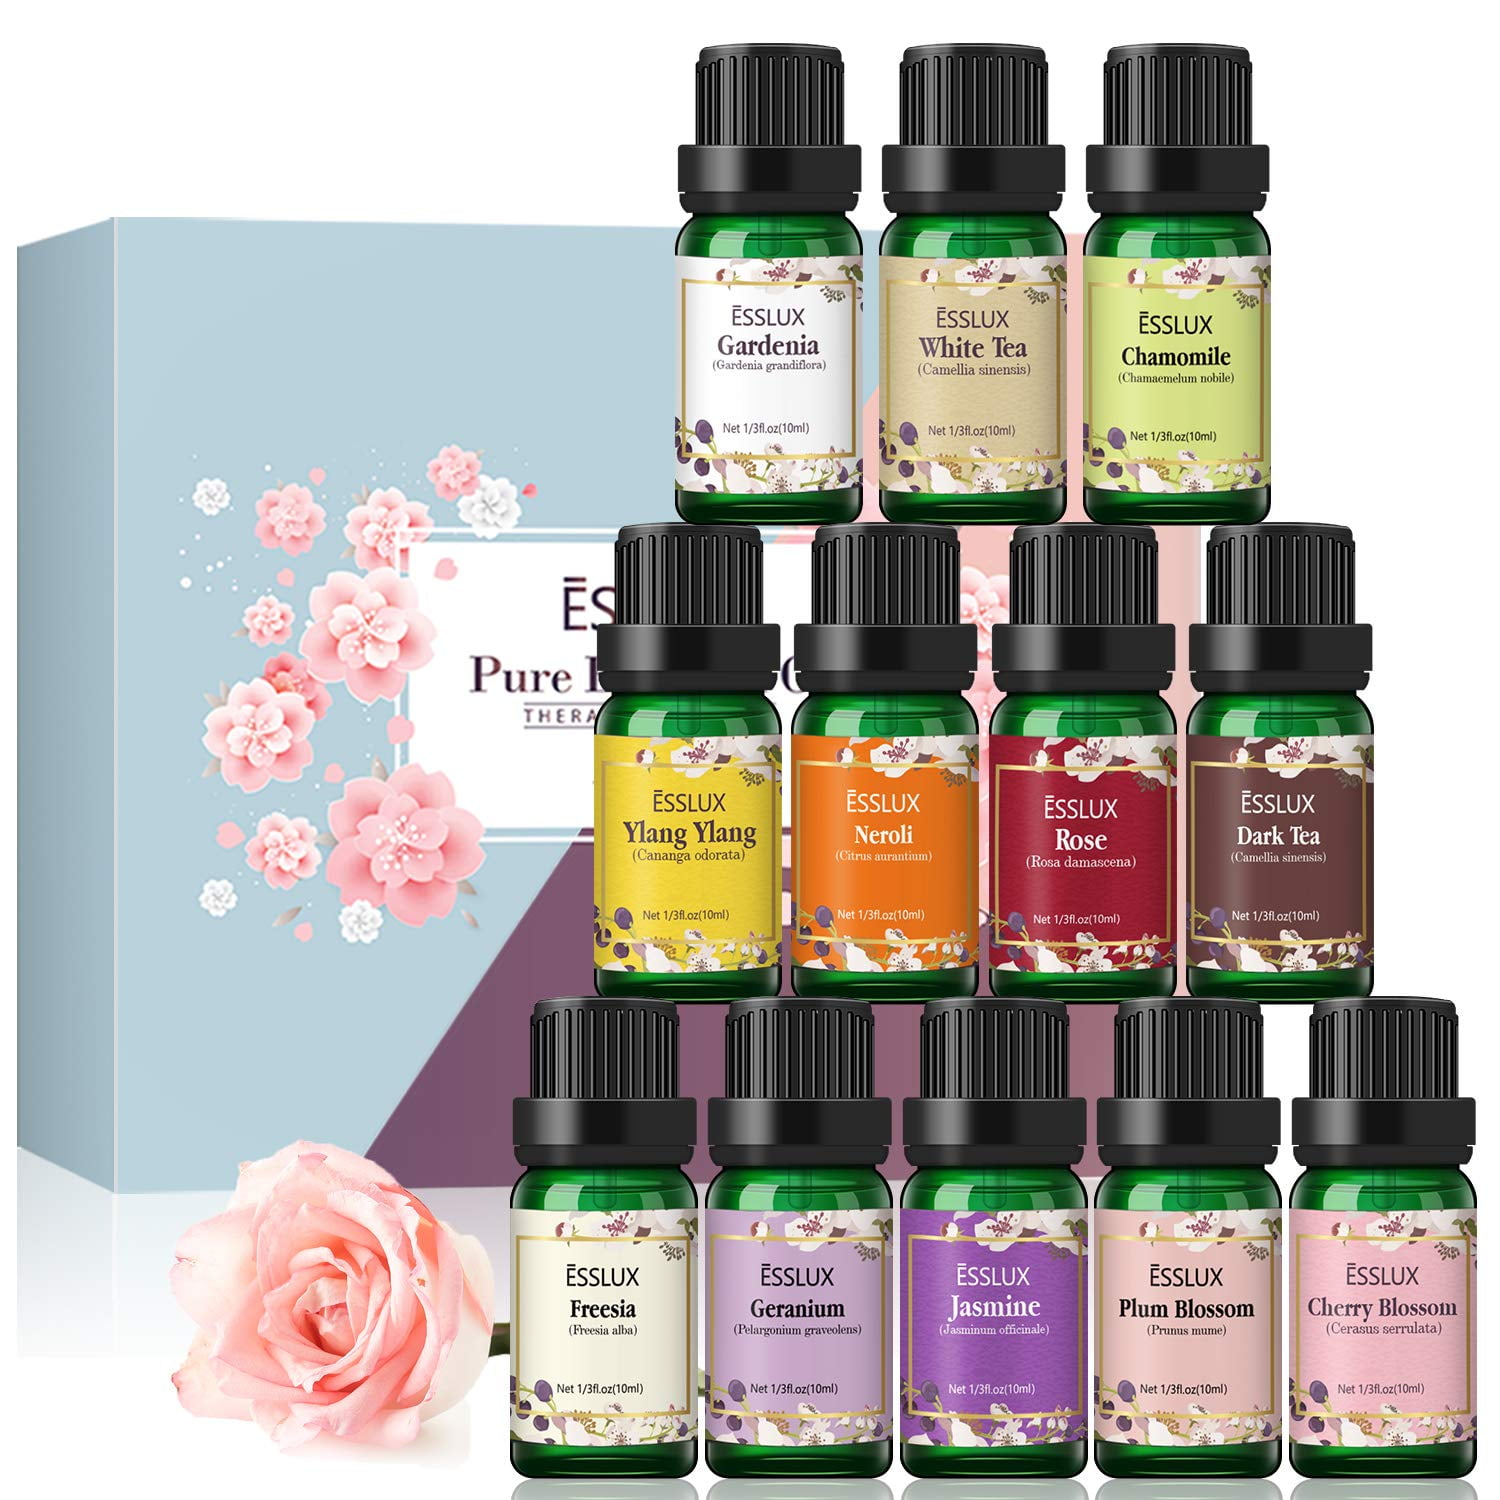 Violet Orchid Lotus essential oil sets AKARZ For Aromatherapy